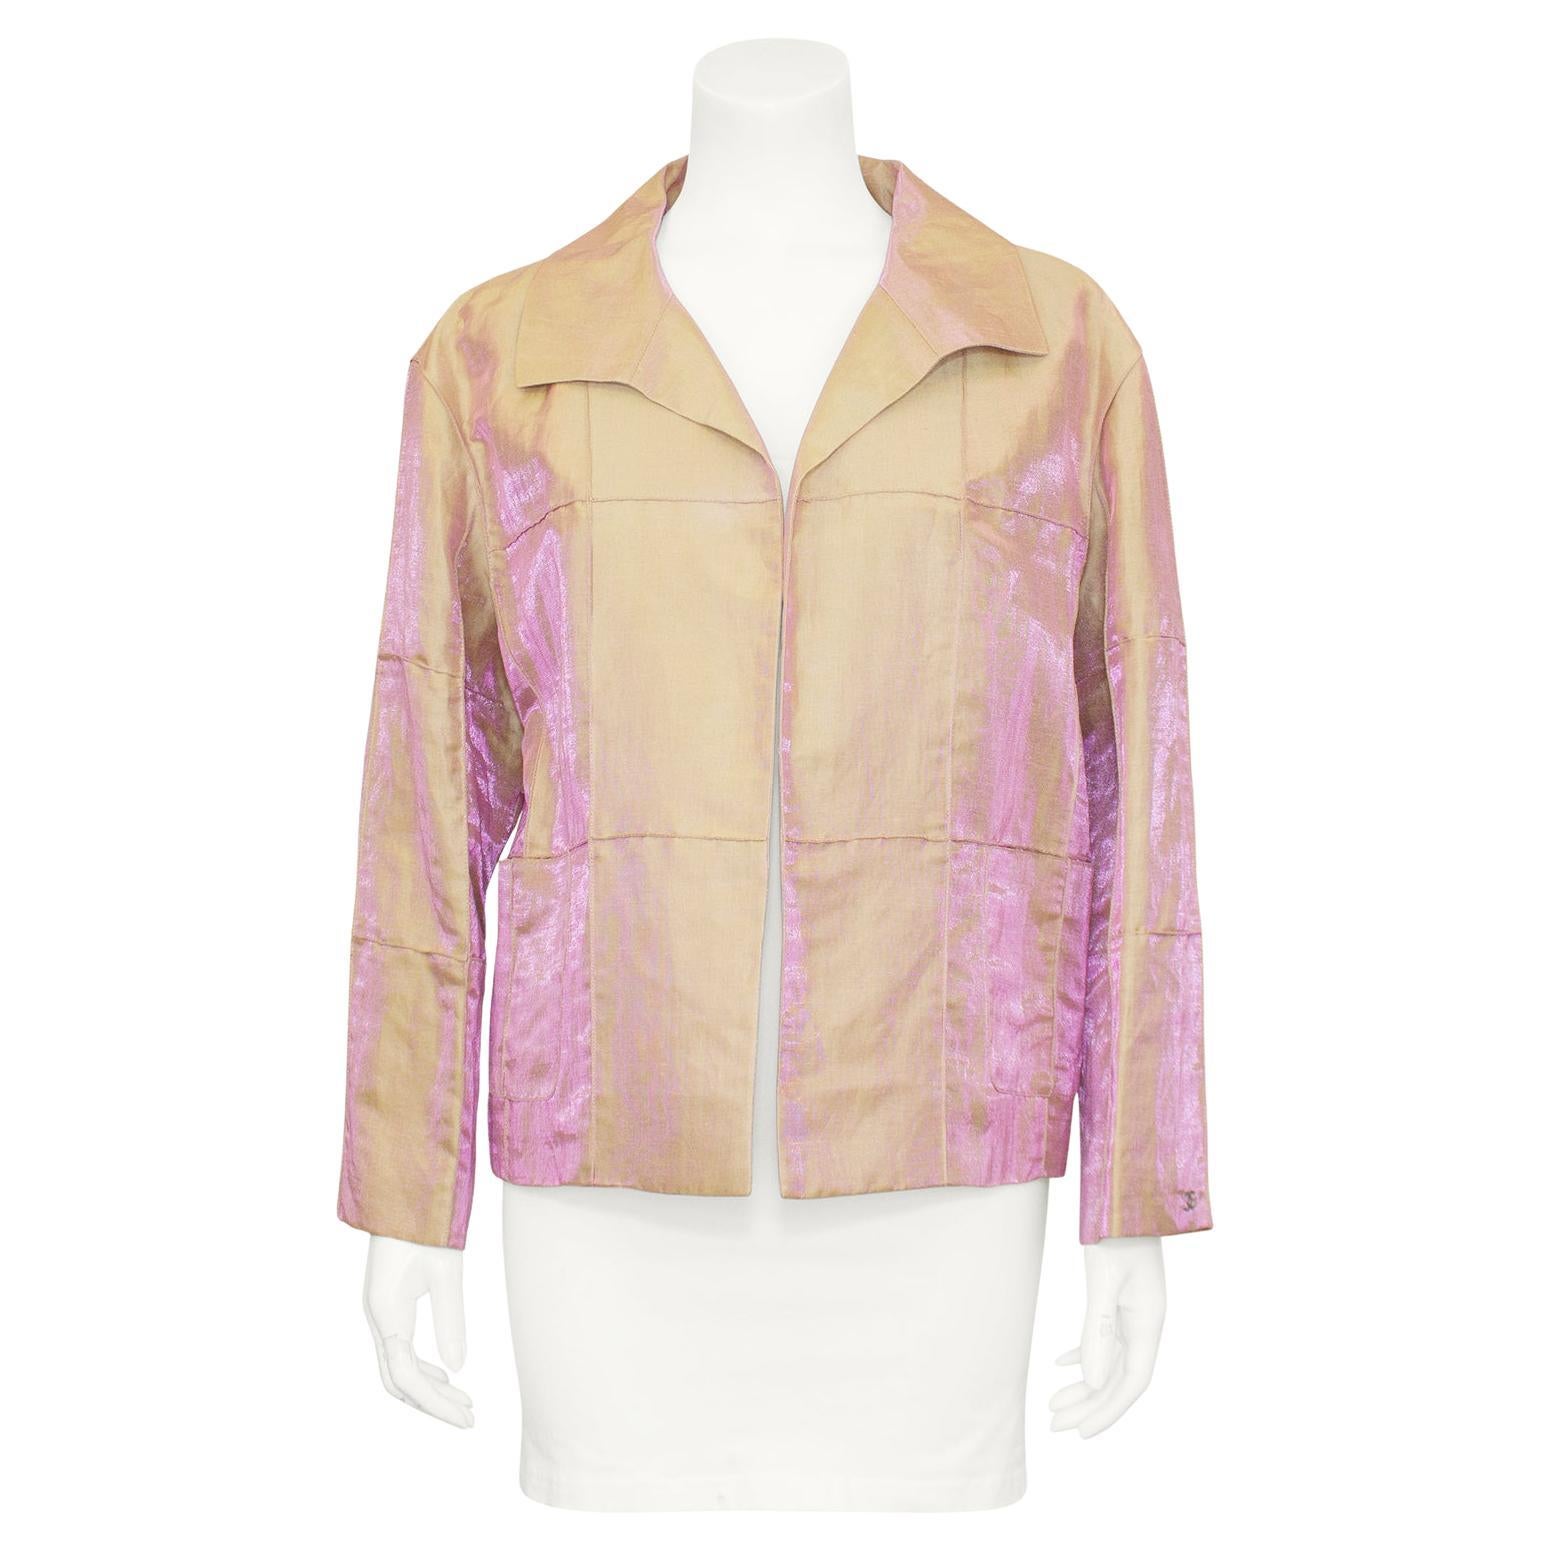 Early 2000s Chanel Pastel Iridescent Open Front Jacket 